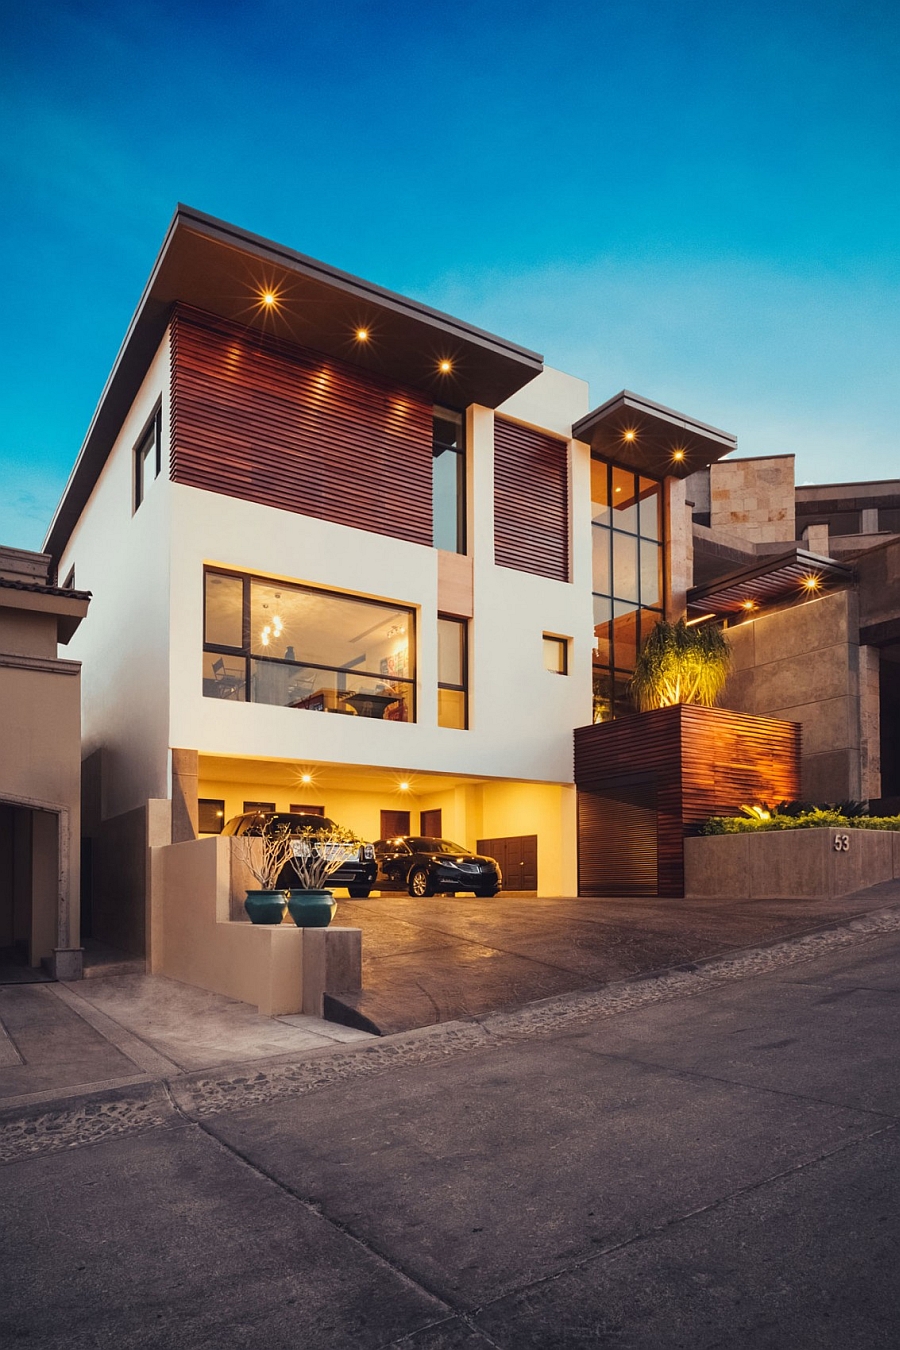 Street view of the lavish private Mexican home